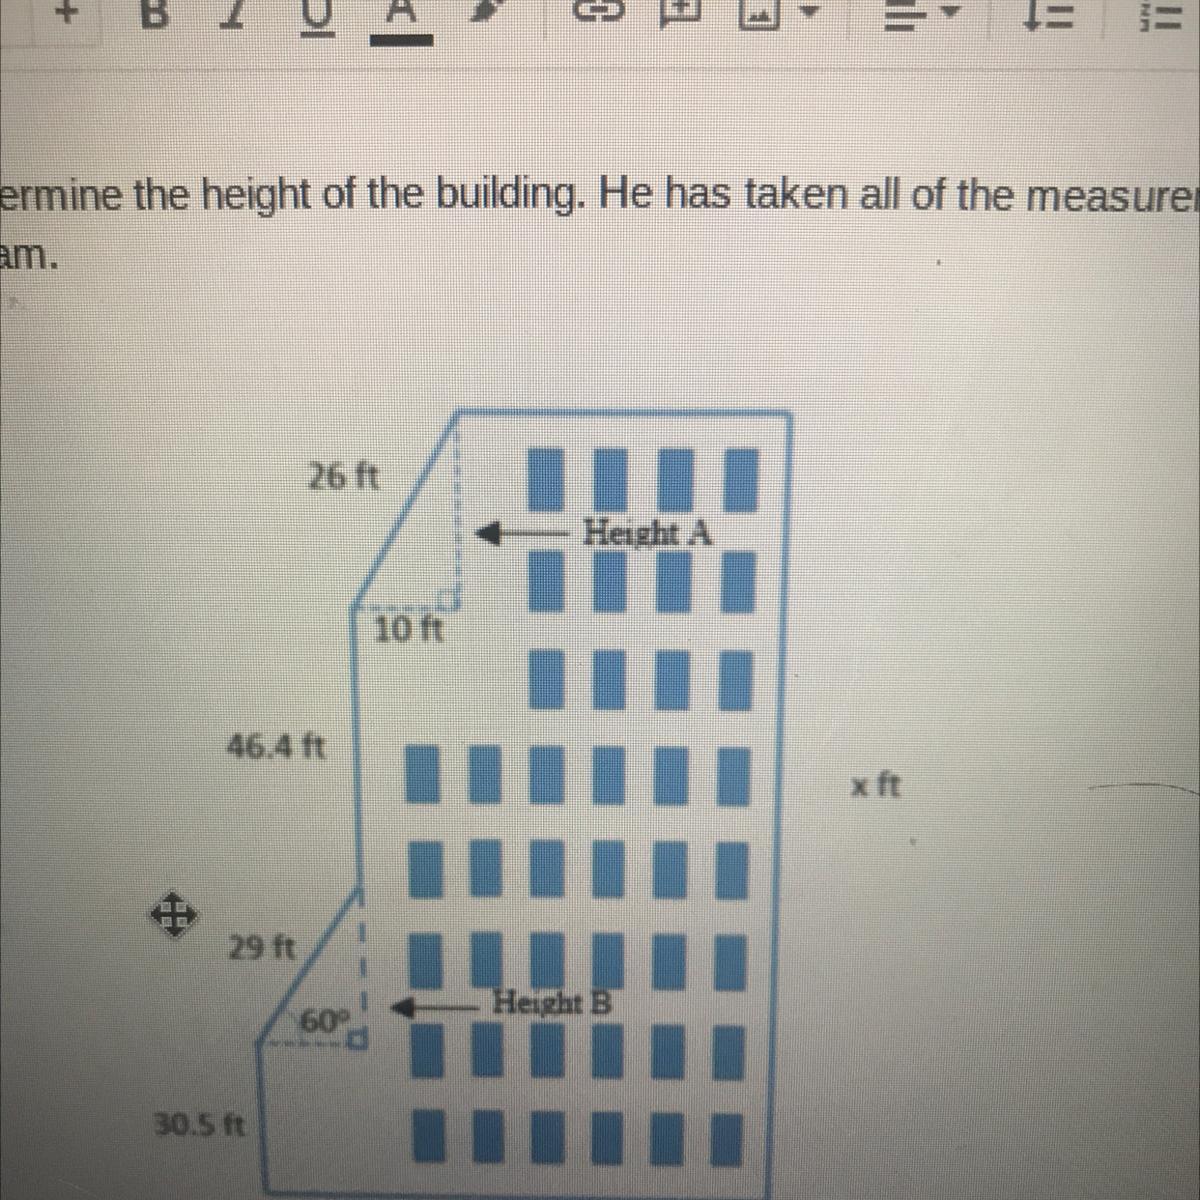 Zamir Needs To Determine The Height Of The BuildingWhats The Height AWhats Height B Whats The Height